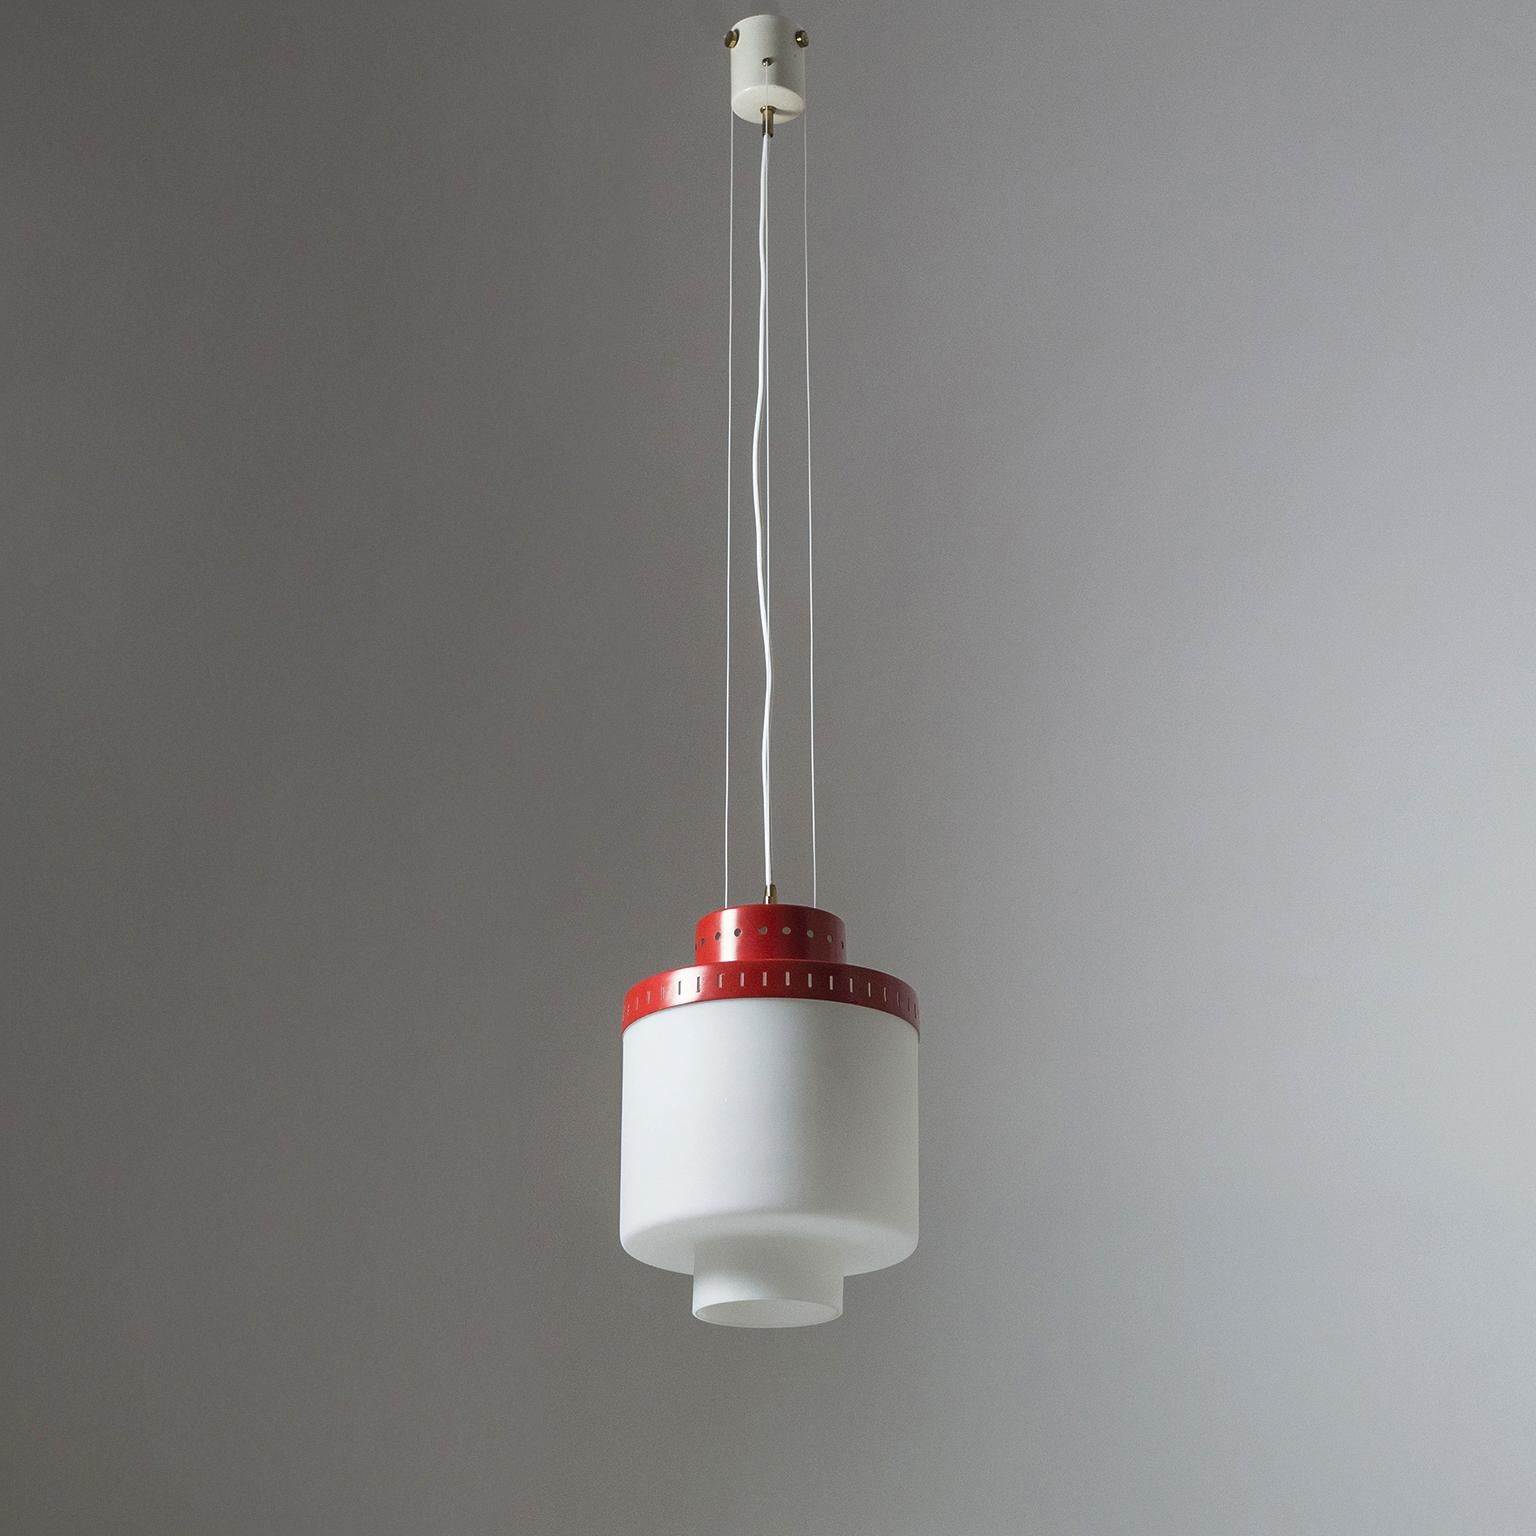 Rare Stilnovo suspension light from the early 1950s. A cylindrical, tiered satin glass diffuser with a red lacquered and pierced aluminum shade is suspended by three nylon wires. Very good original condition with minor loss of original paint and a